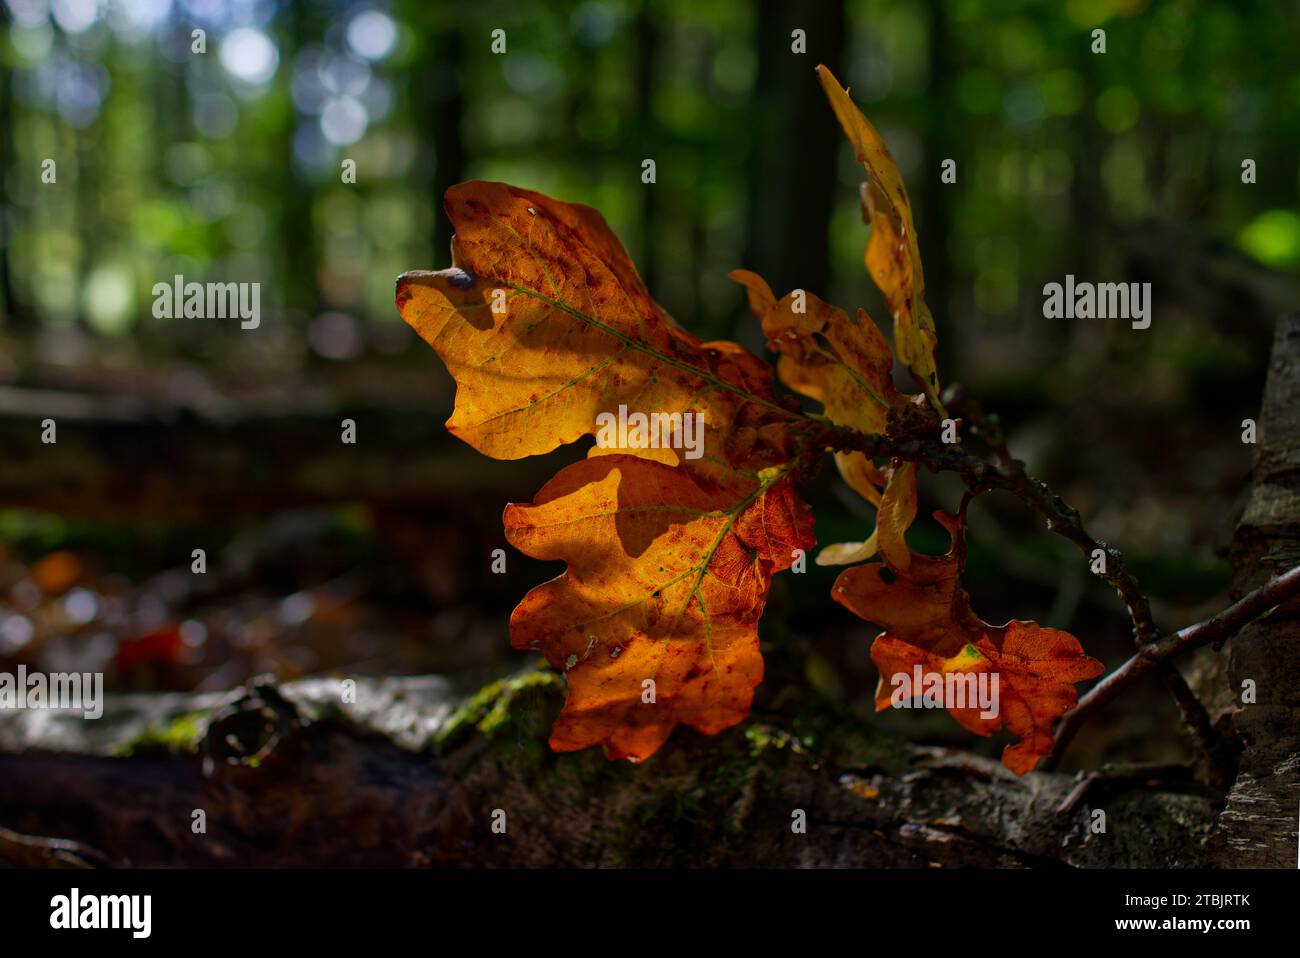 close-up view of oak leaves laying on the ground in bright orange and brown colors with blurred forest in the background Stock Photo